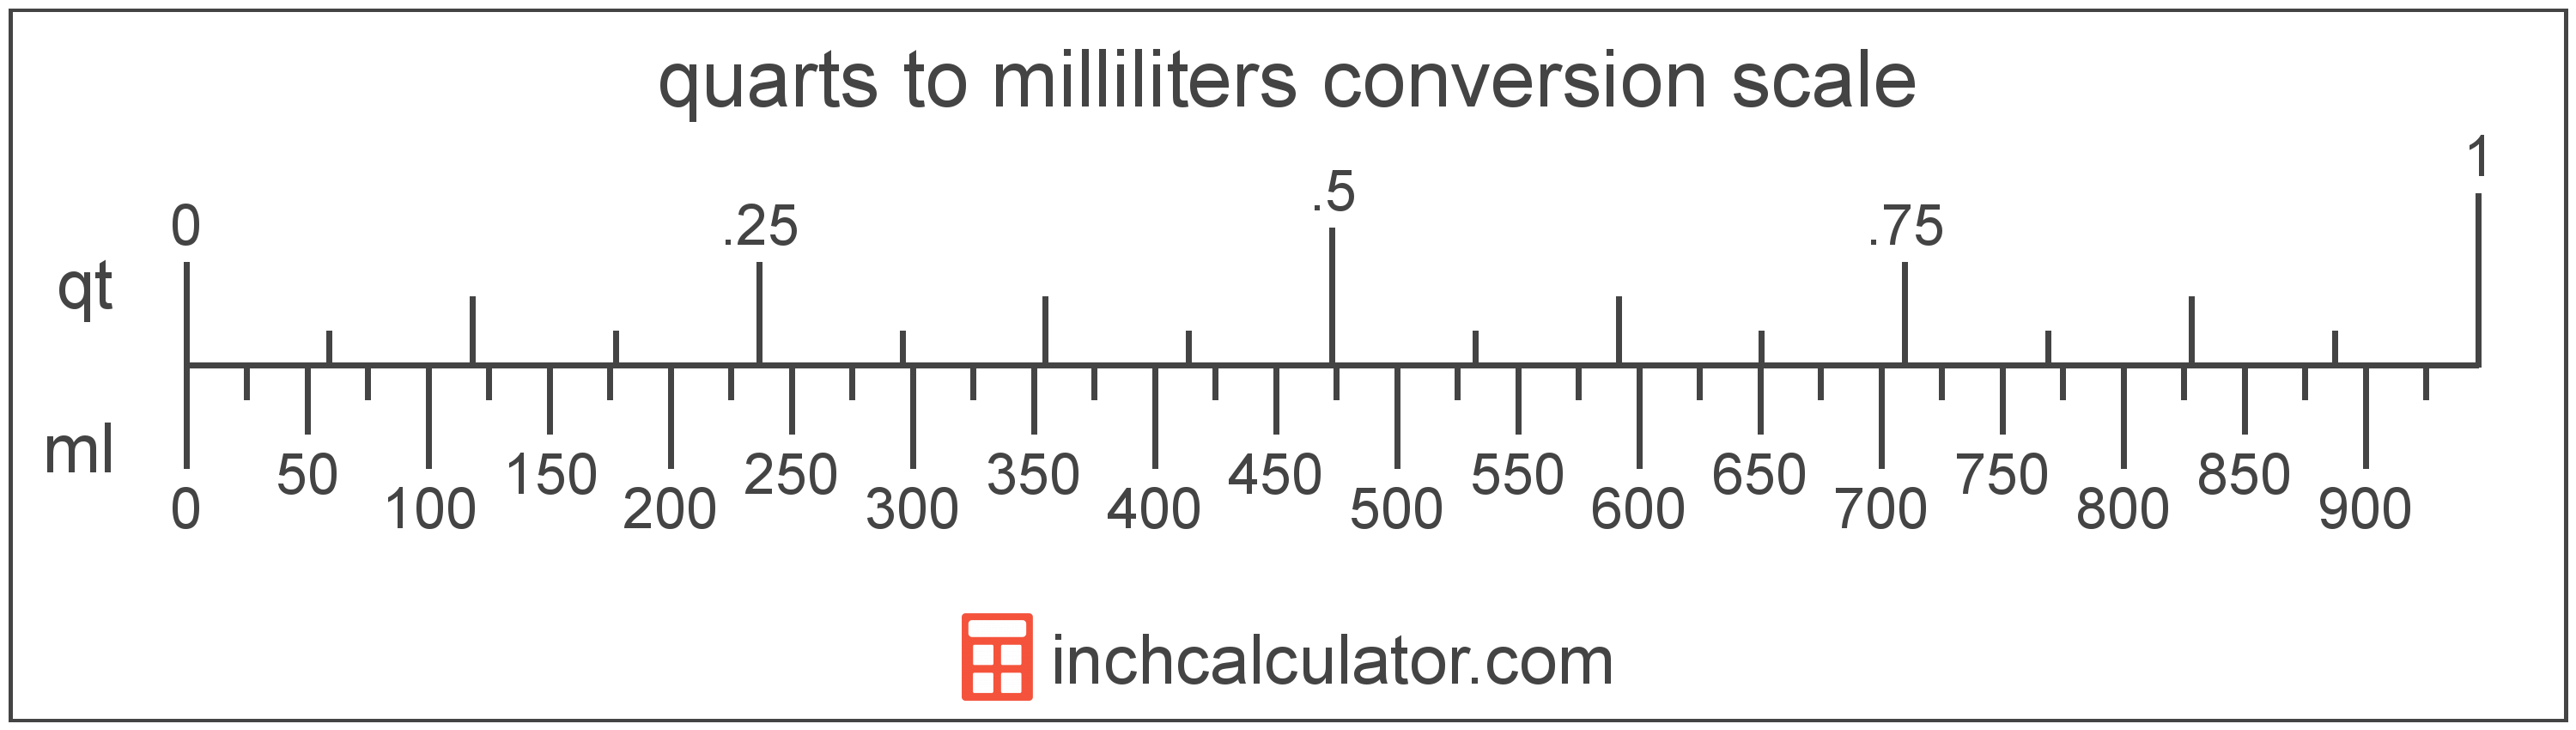 Convert Inches To Gallons Chart